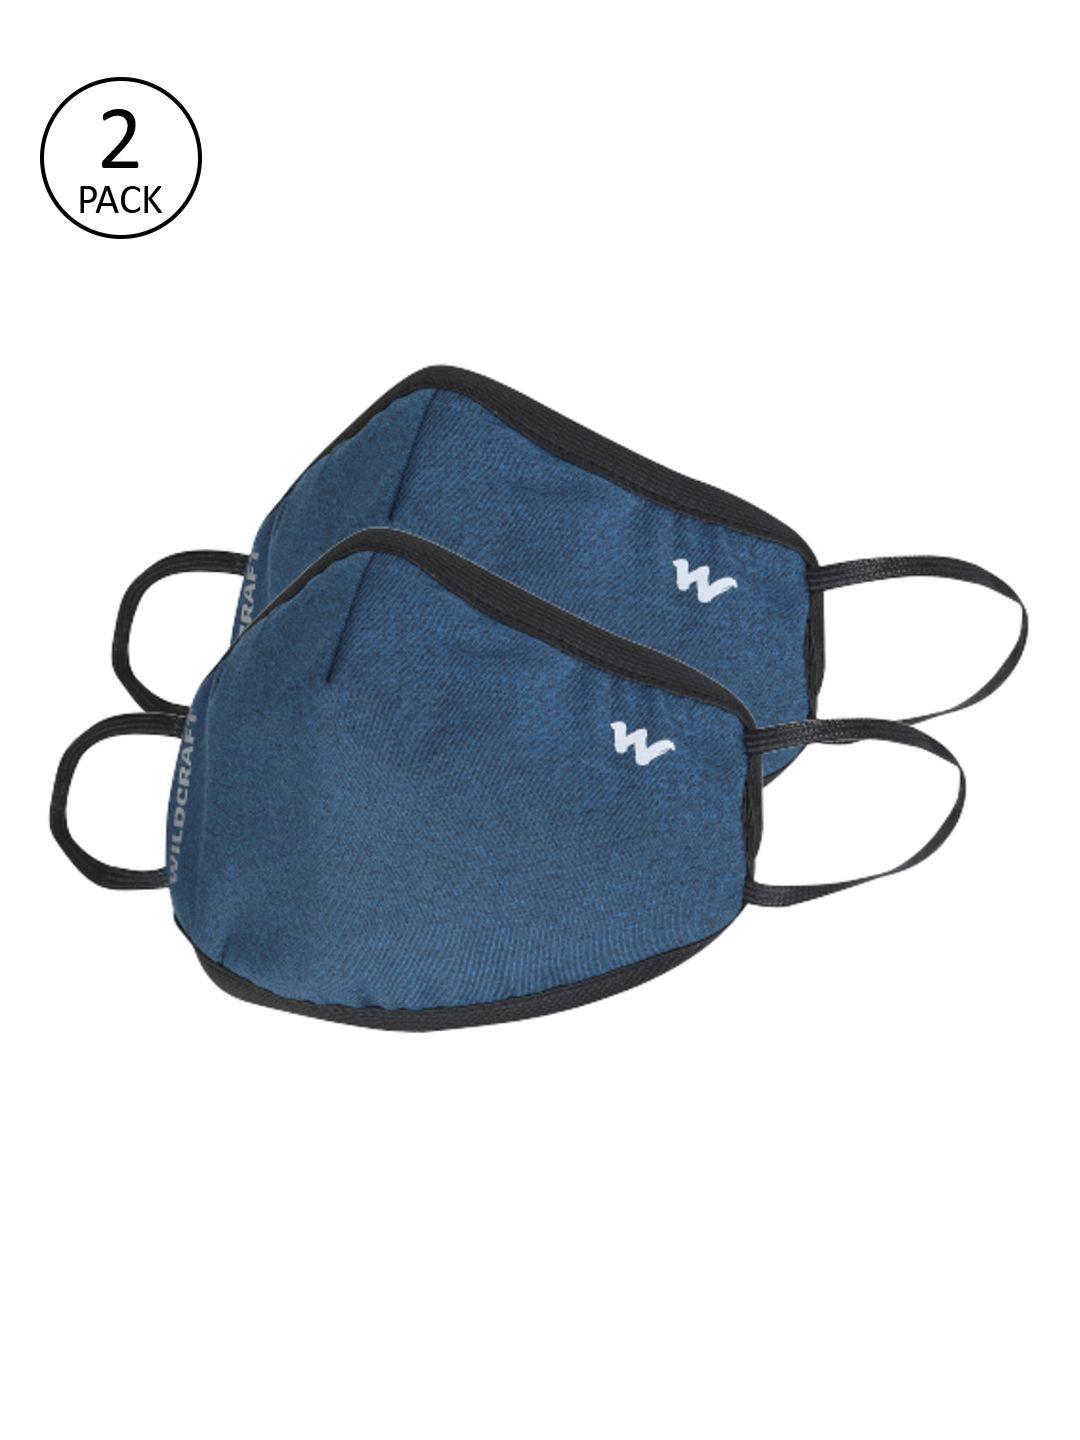 wildcraft adults navy blue 2 pcs 3-ply w95+ protective outdoor masks